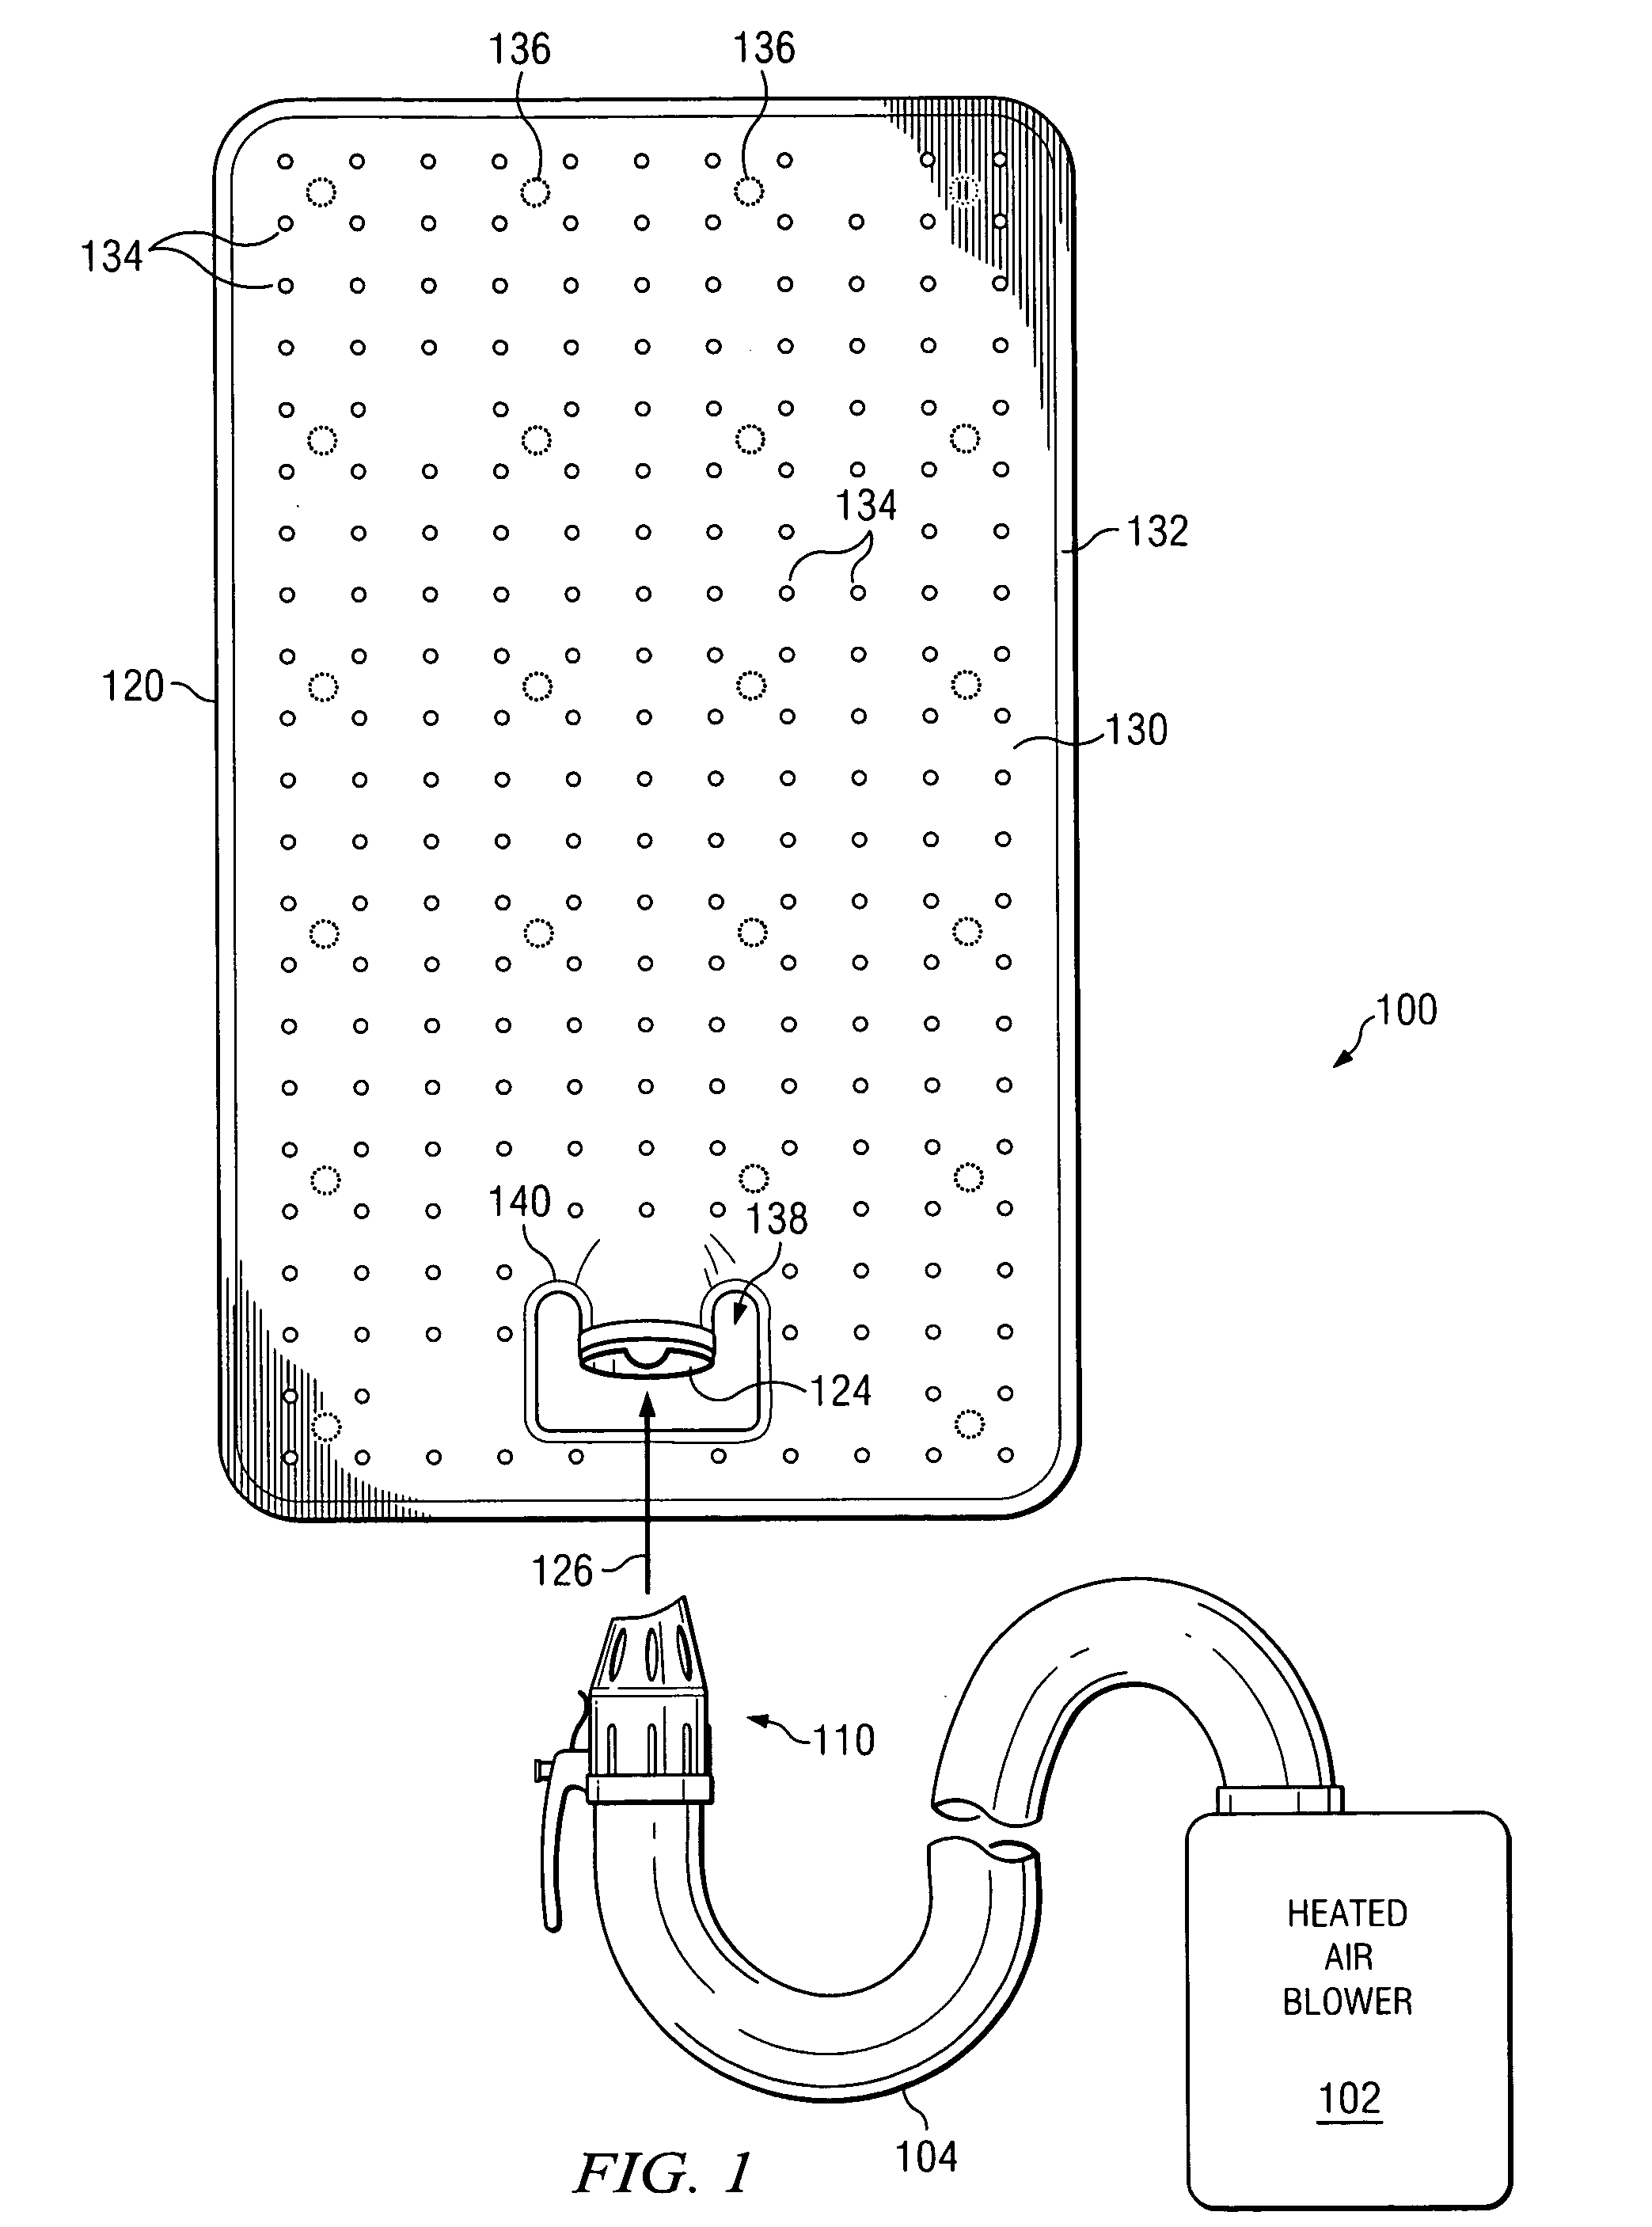 Method and apparatus for connecting a hose to a warming blanket